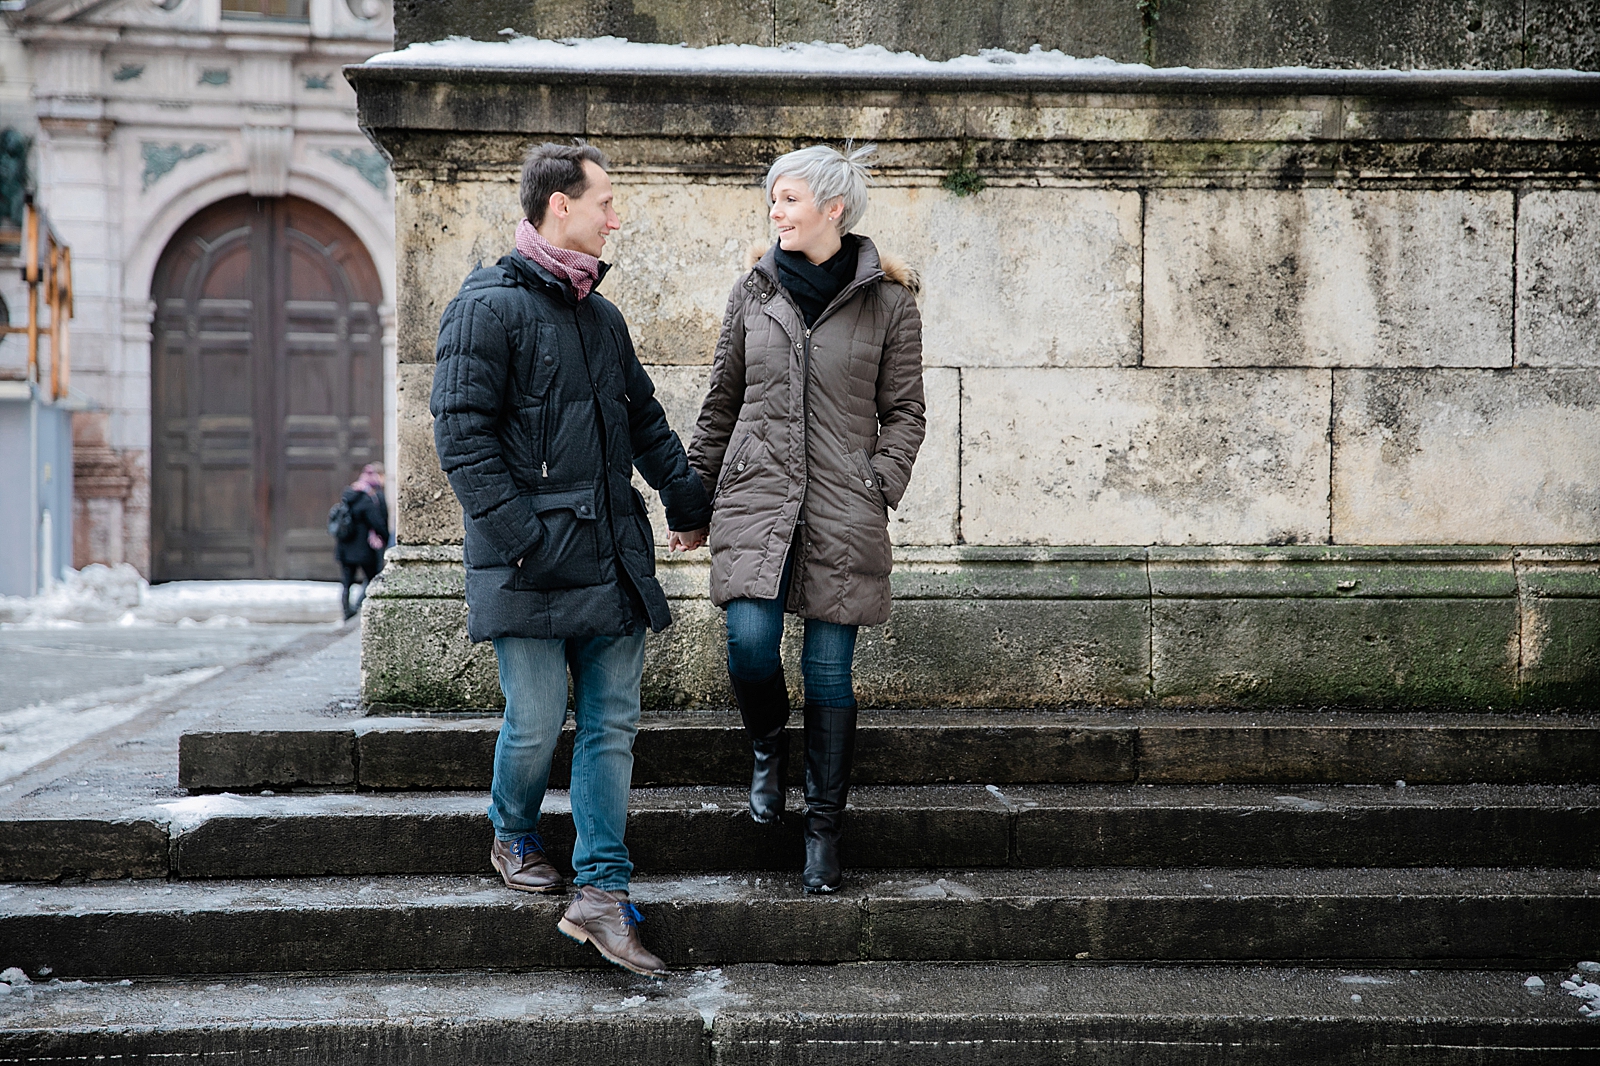 Winter Engagement Session in Munich